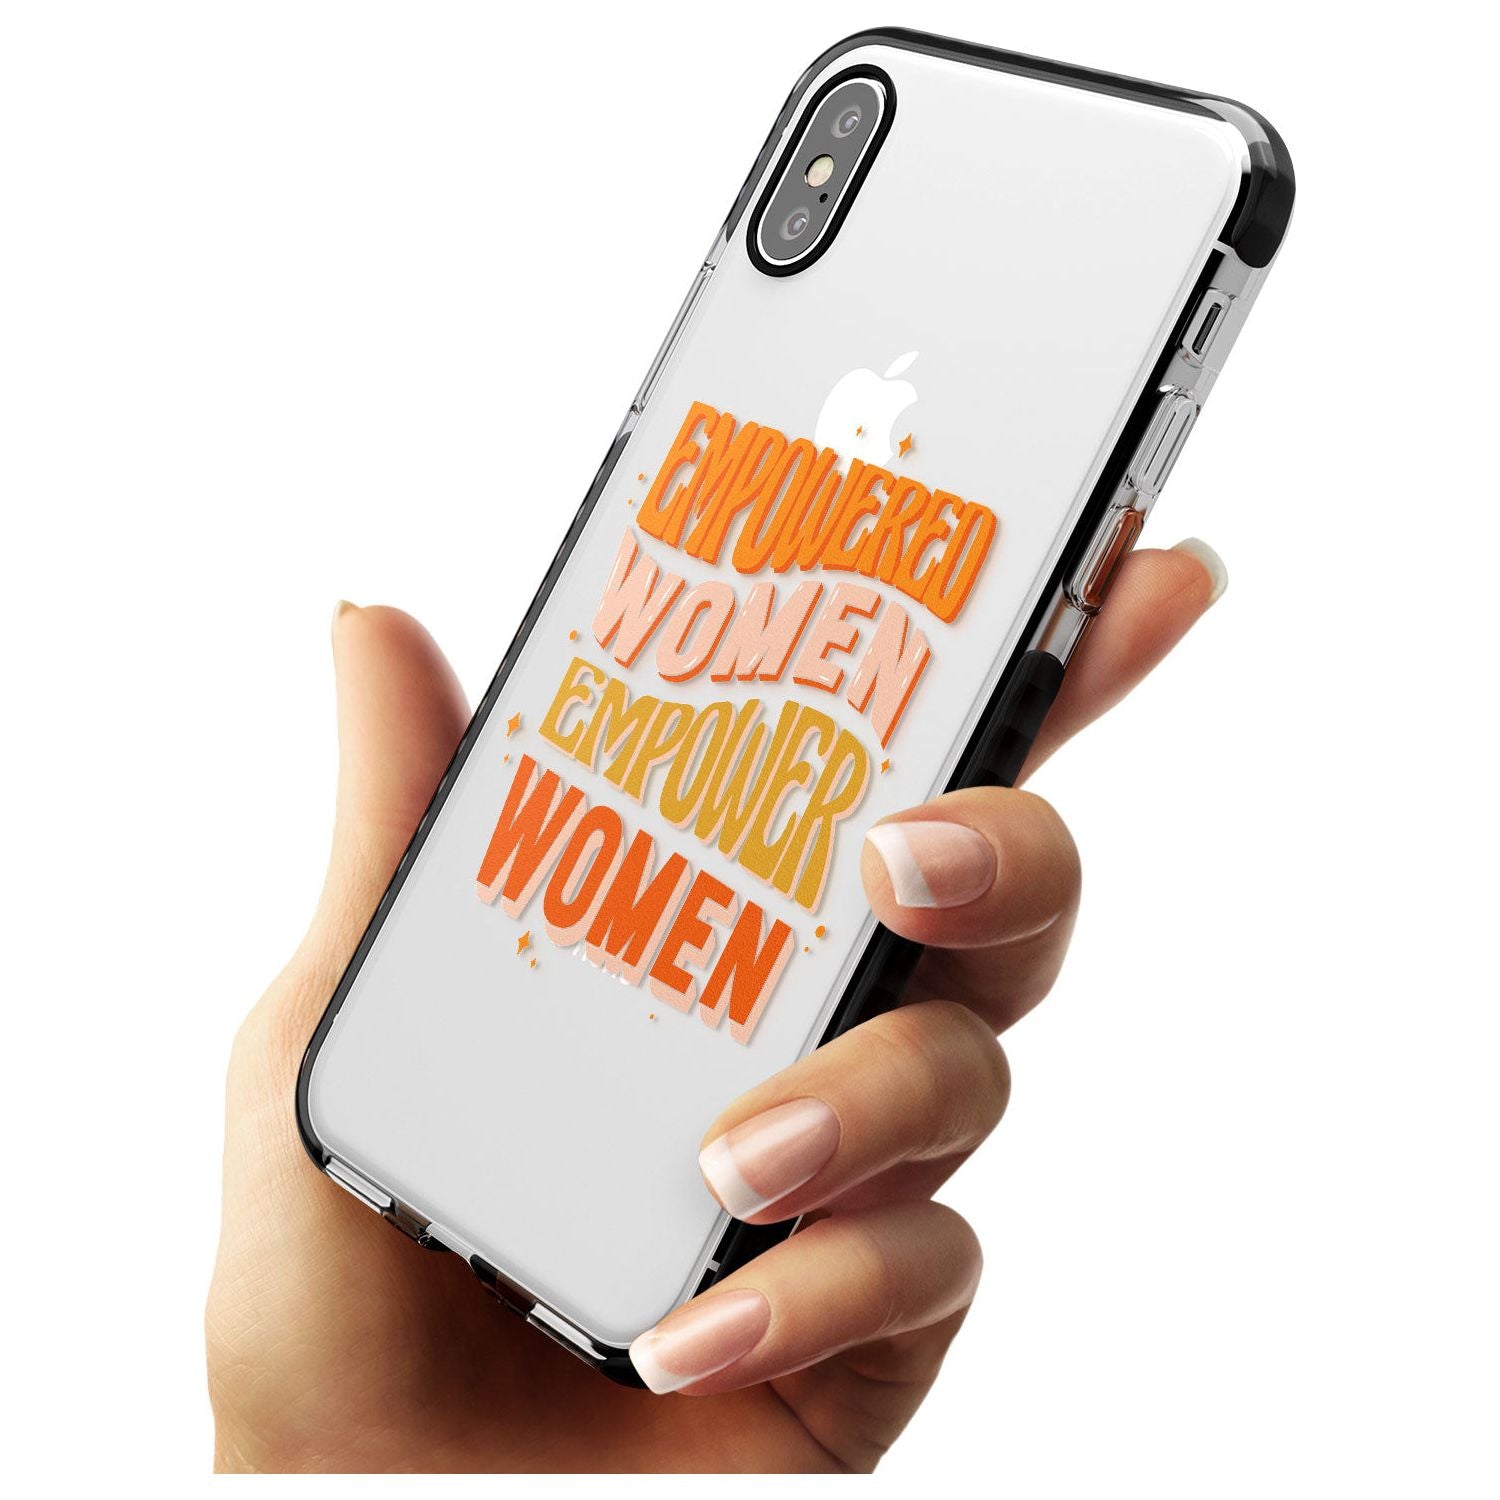 Empowered Women Black Impact Phone Case for iPhone X XS Max XR